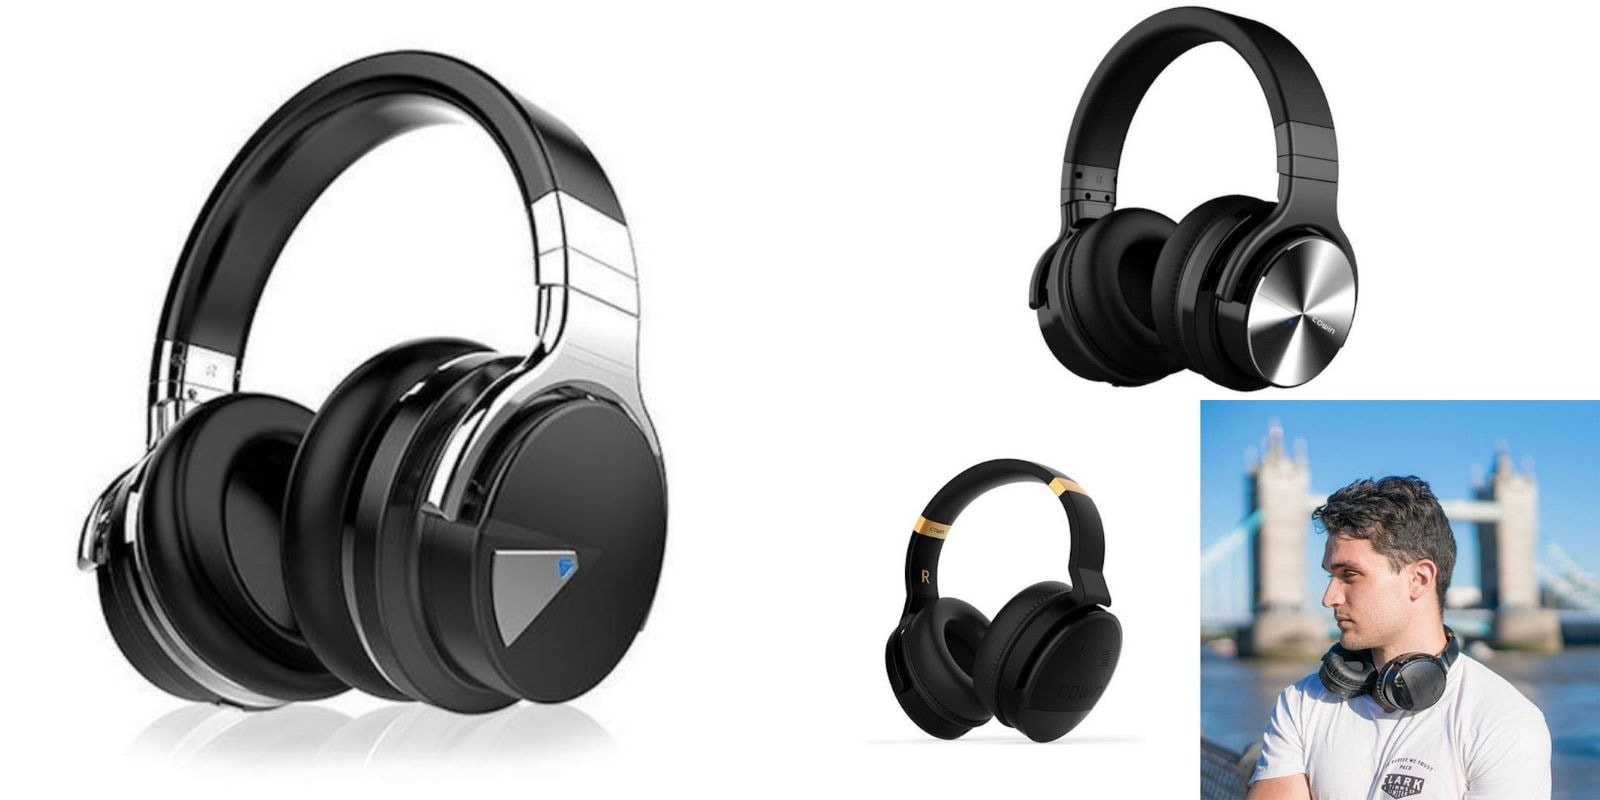 We've rounded up three of the best deals on noise cancelling headphones from Cowin.